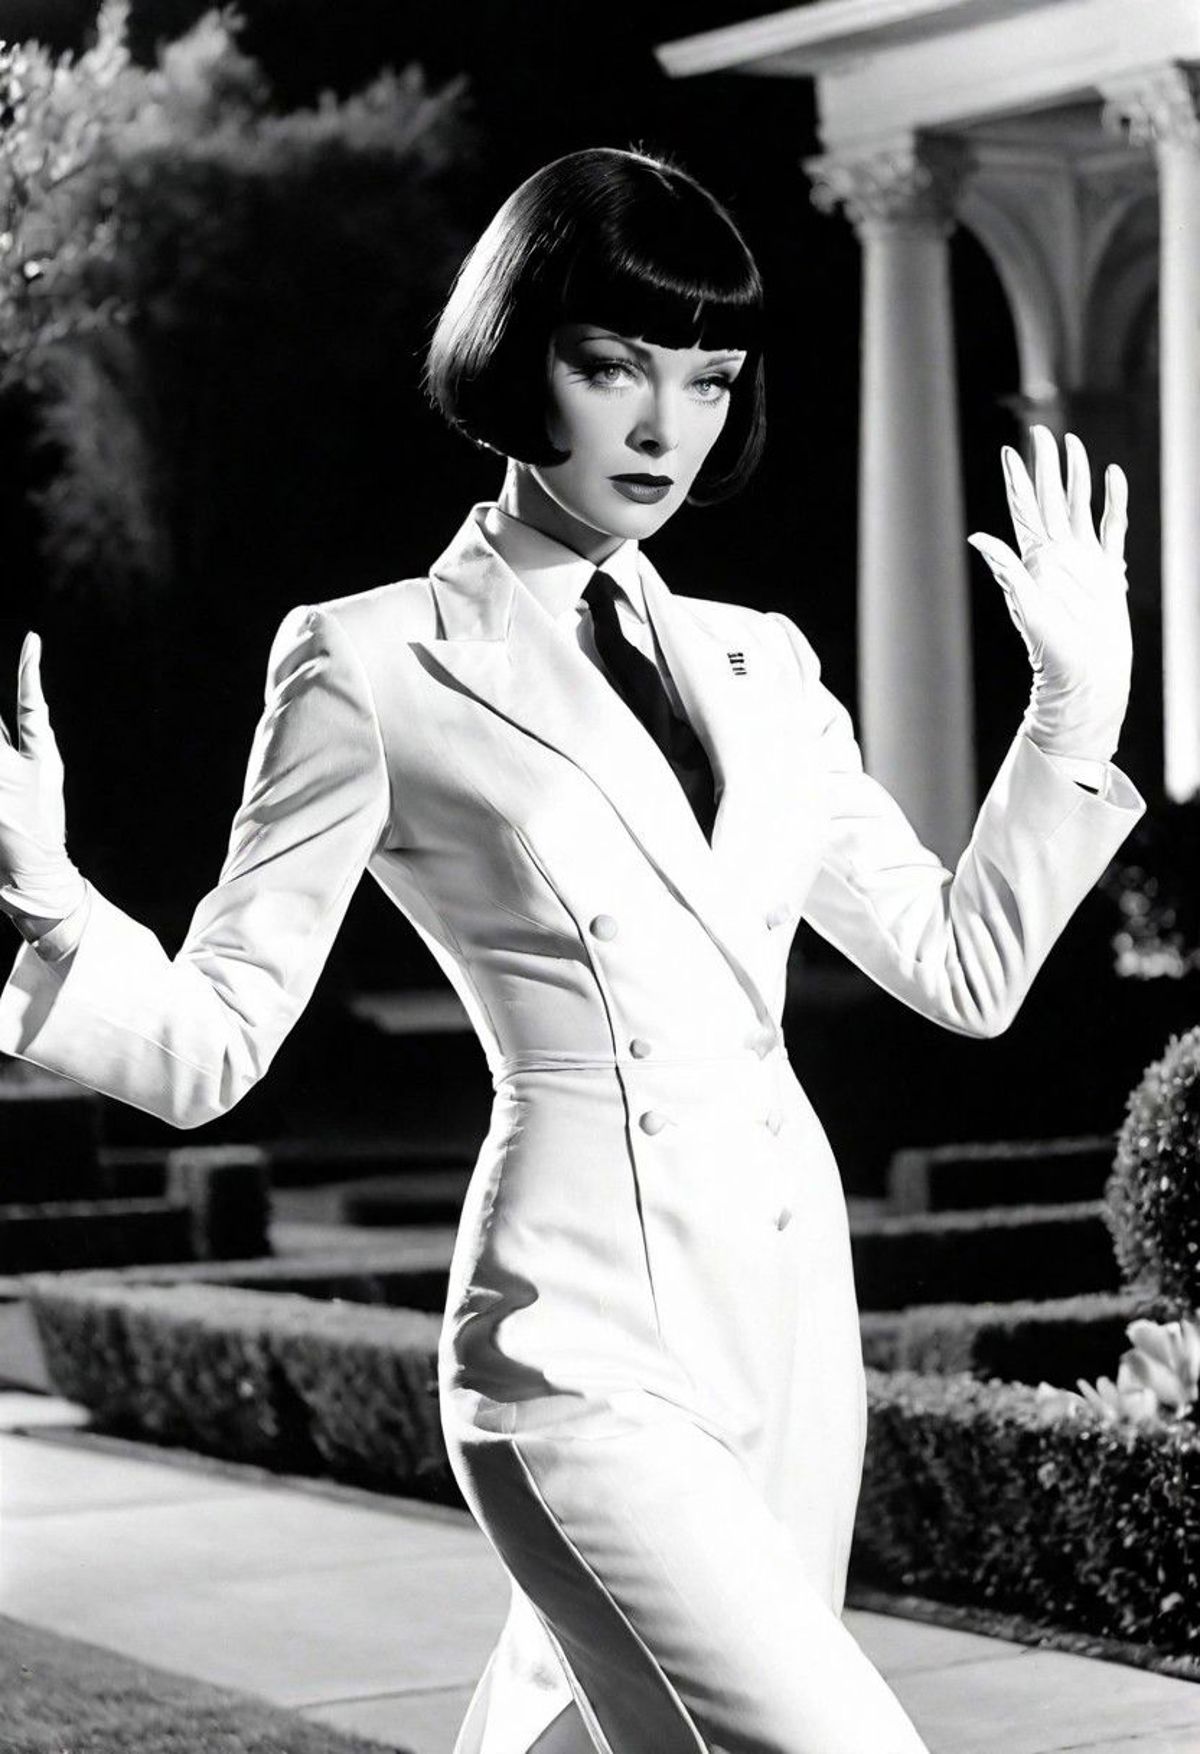 A woman wearing a white suit and tie stands in a garden.